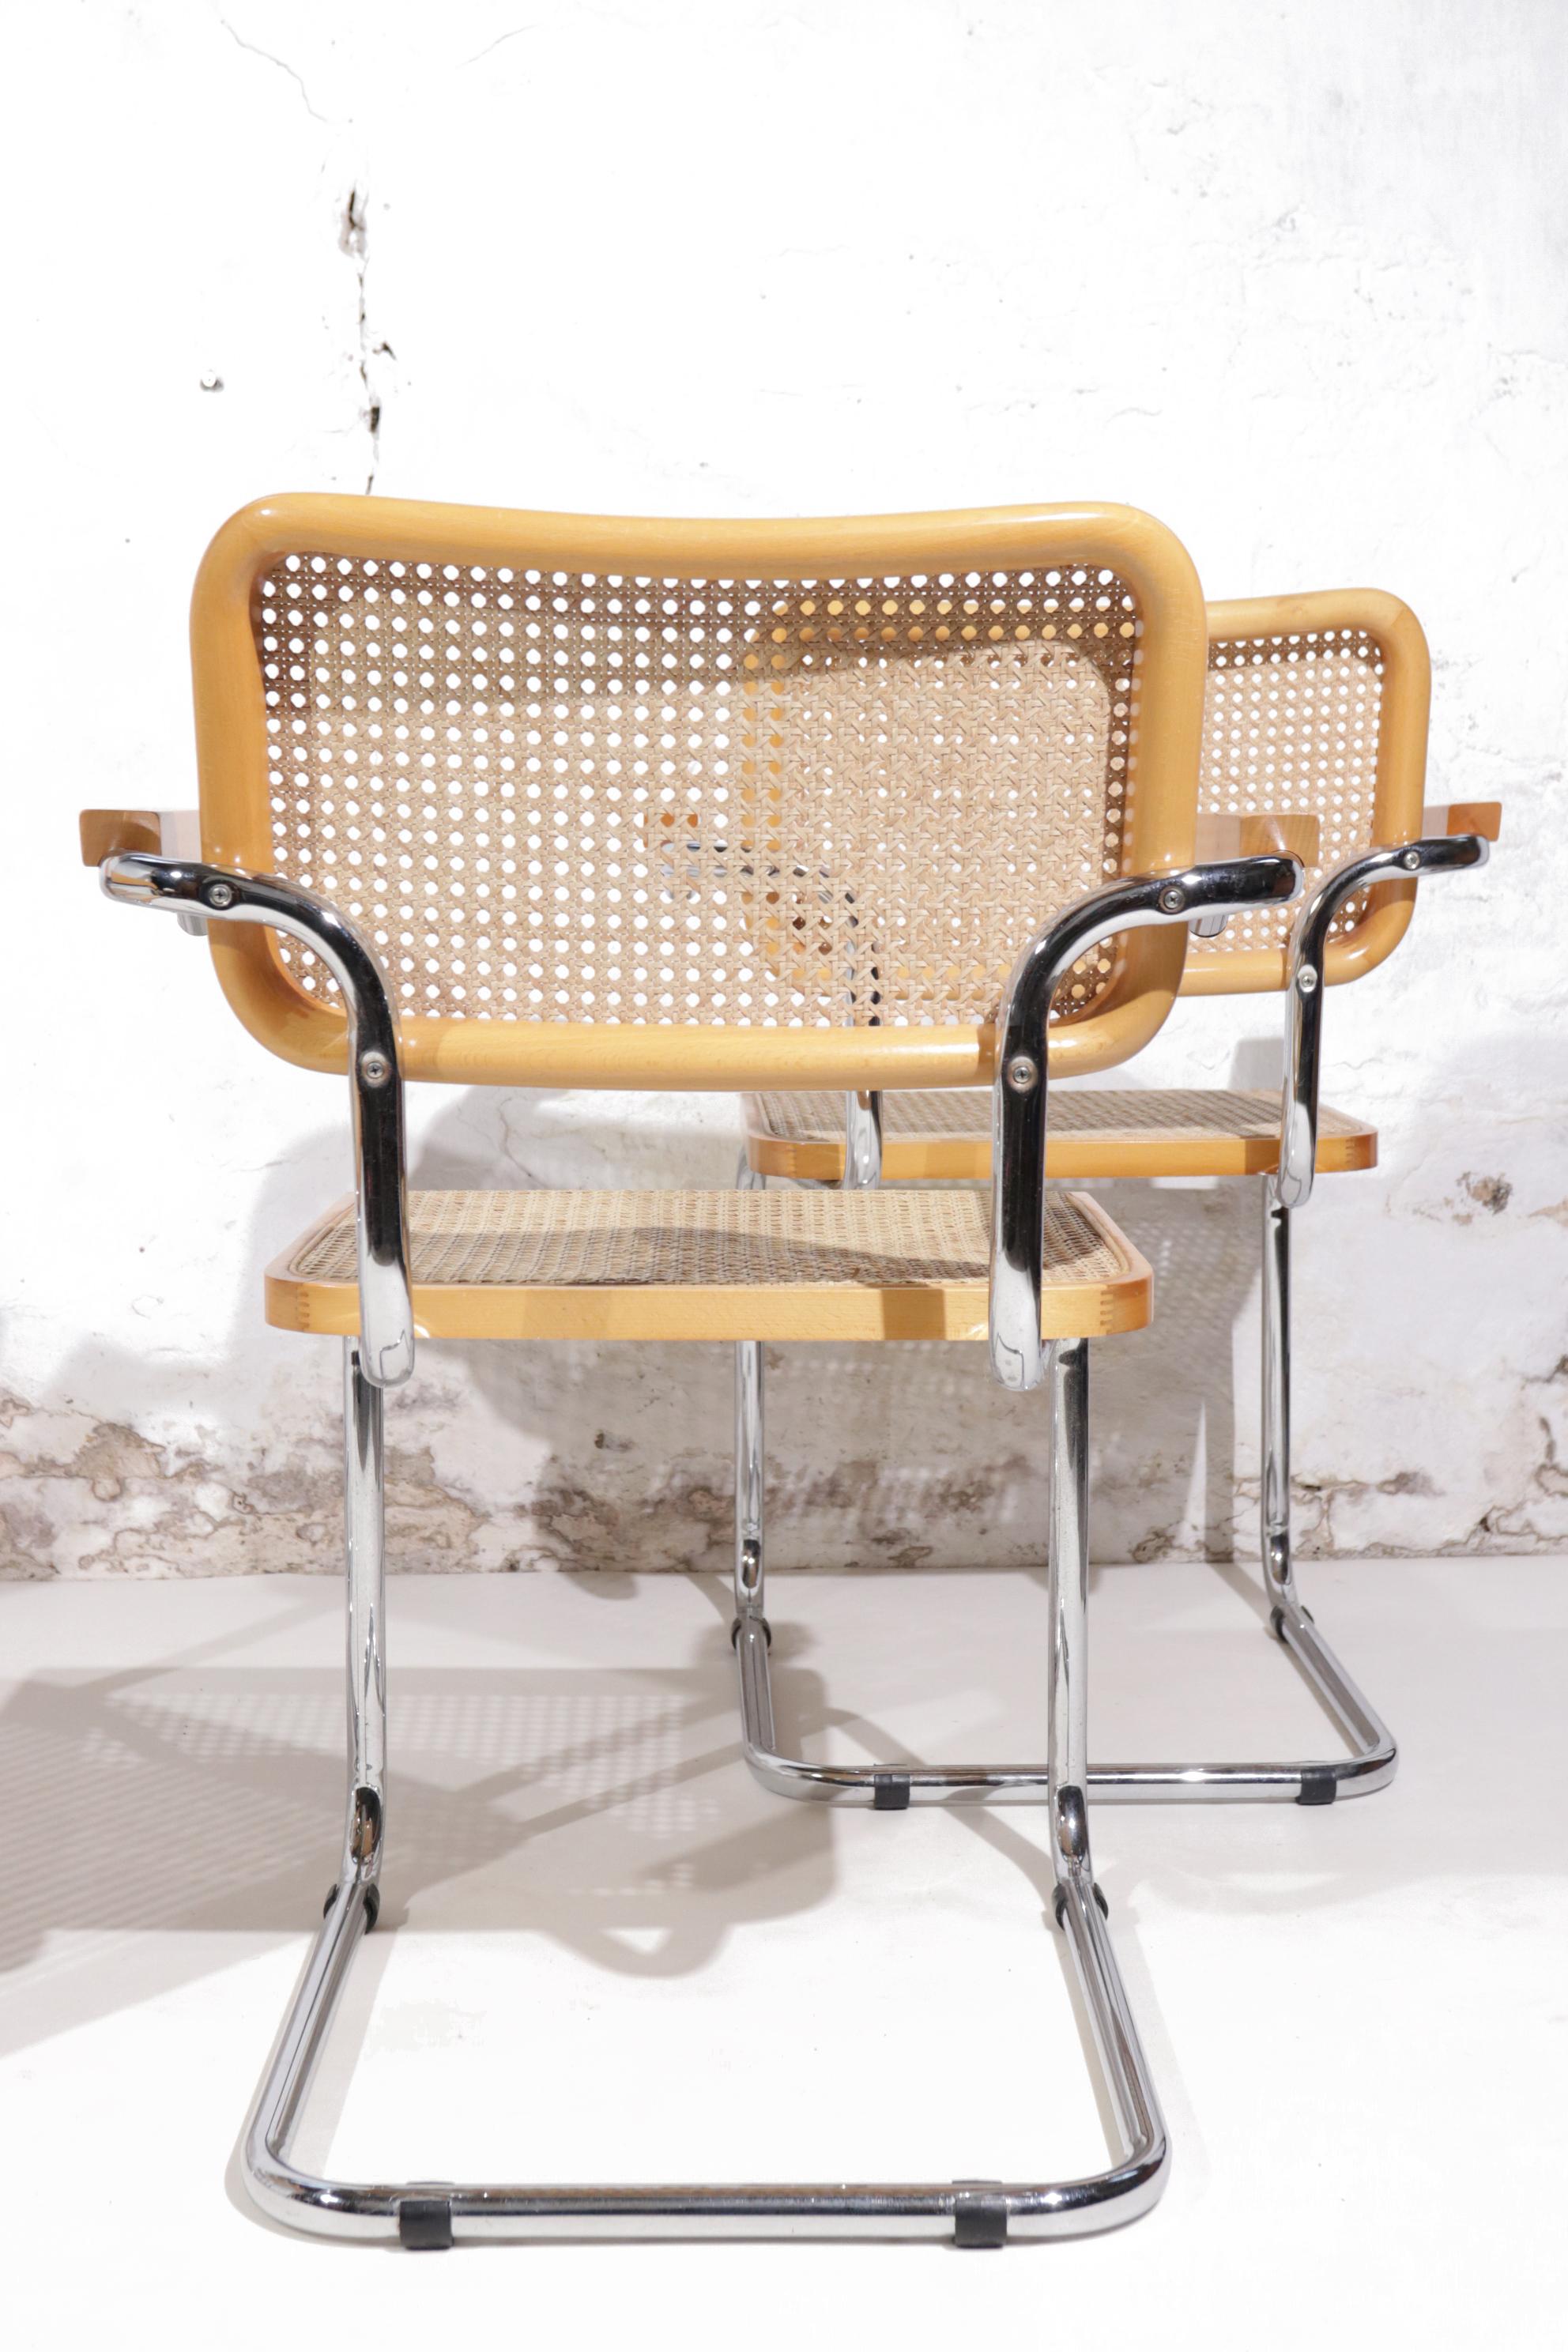 4 Midcentury chairs designed by architect Marcel Breuer in 1928, the chairs are named after his daughter Francesca.
These 4 chairs are from the 1980s and are made by Fasem Italy.
The chairs were in a room where they had not been doing anything for